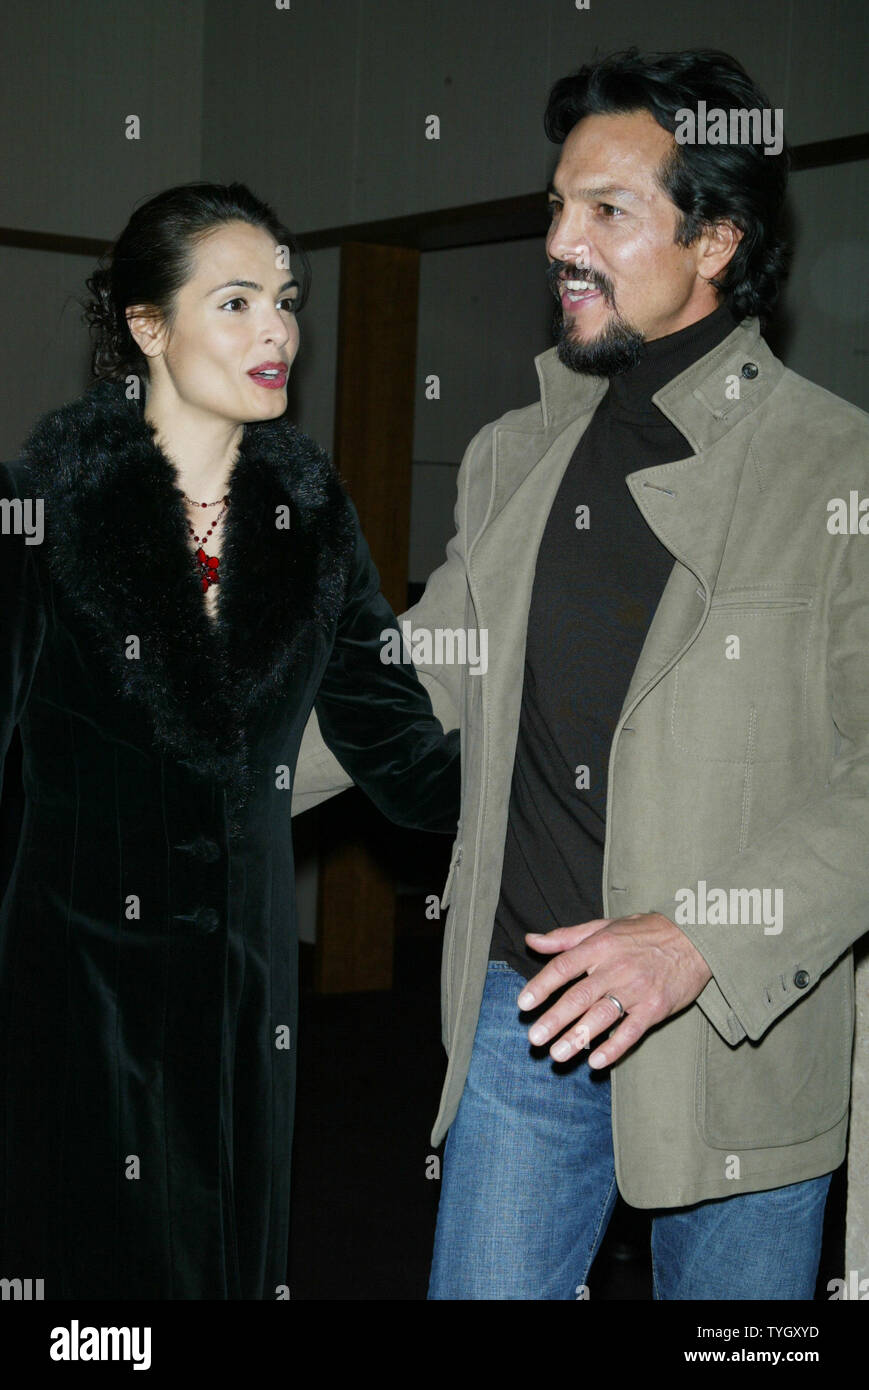 Benjamin Bratt and wife Talisa Soto arrive for the premiere of 'The Woodsman' at the Skirball Center in New York on December 15, 2004.  (UPI Photo/Laura Cavanaugh) Stock Photo